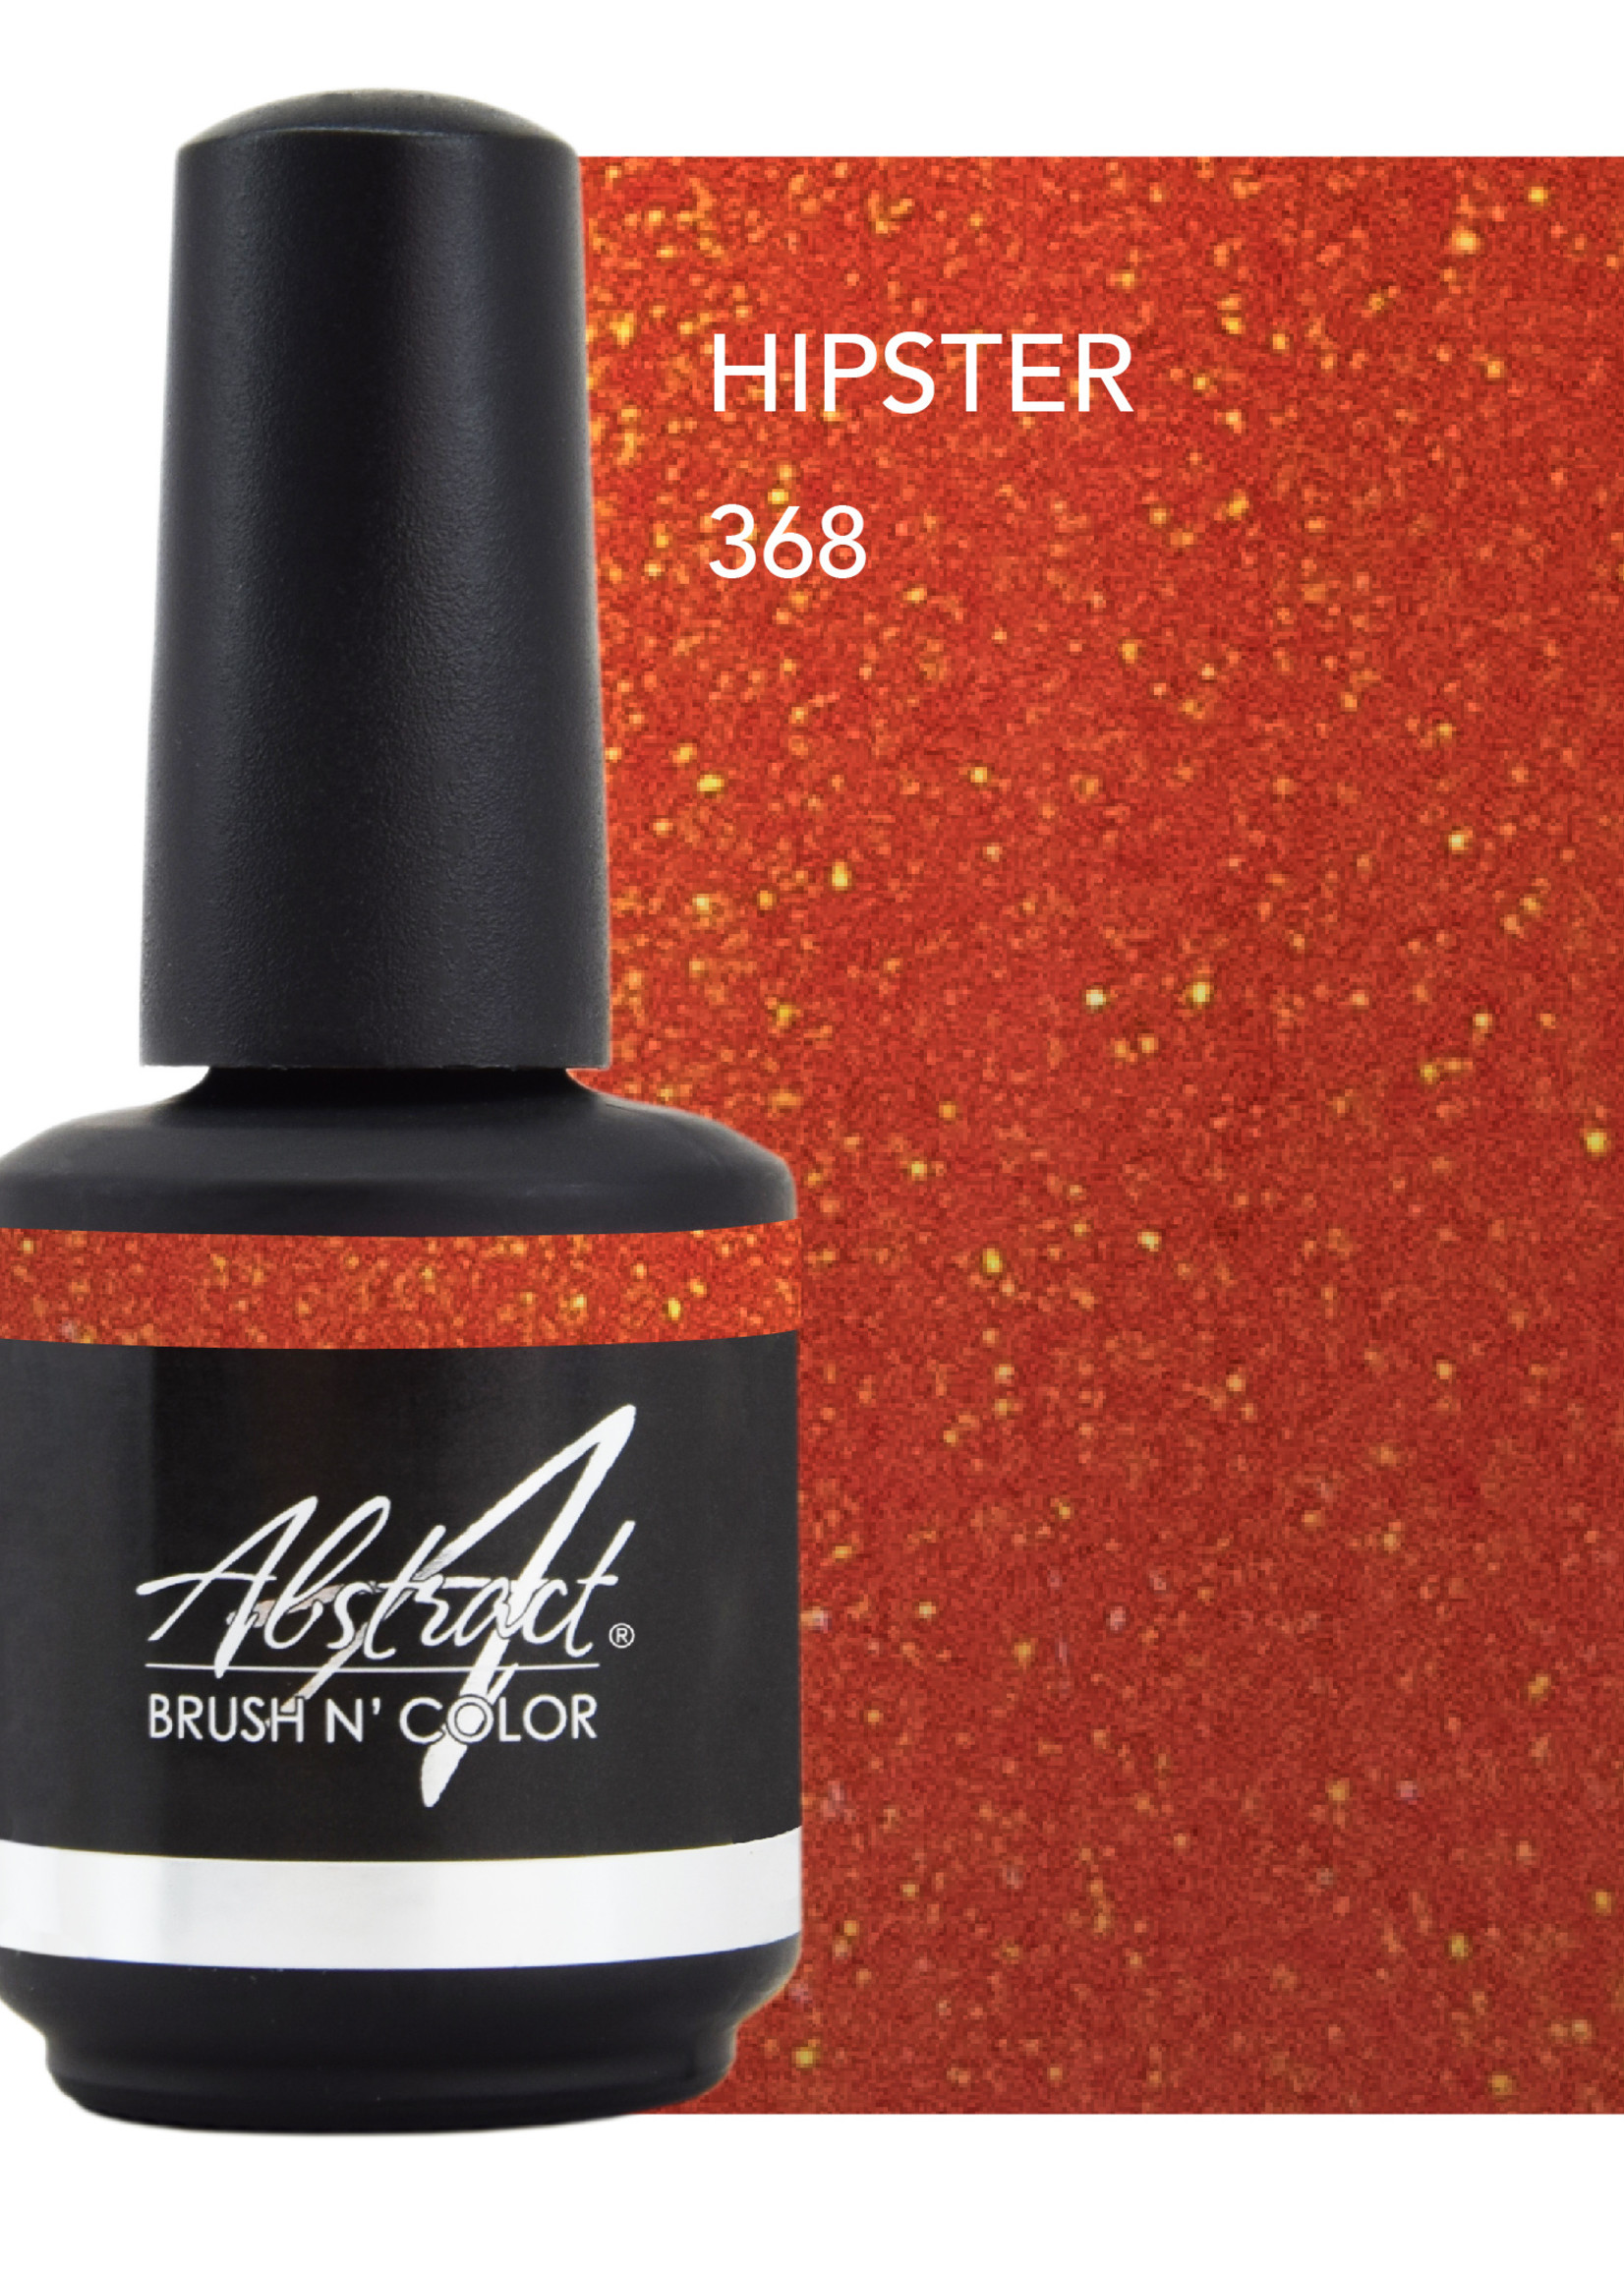 Abstract® Brush N' Color 15 ml Hipster